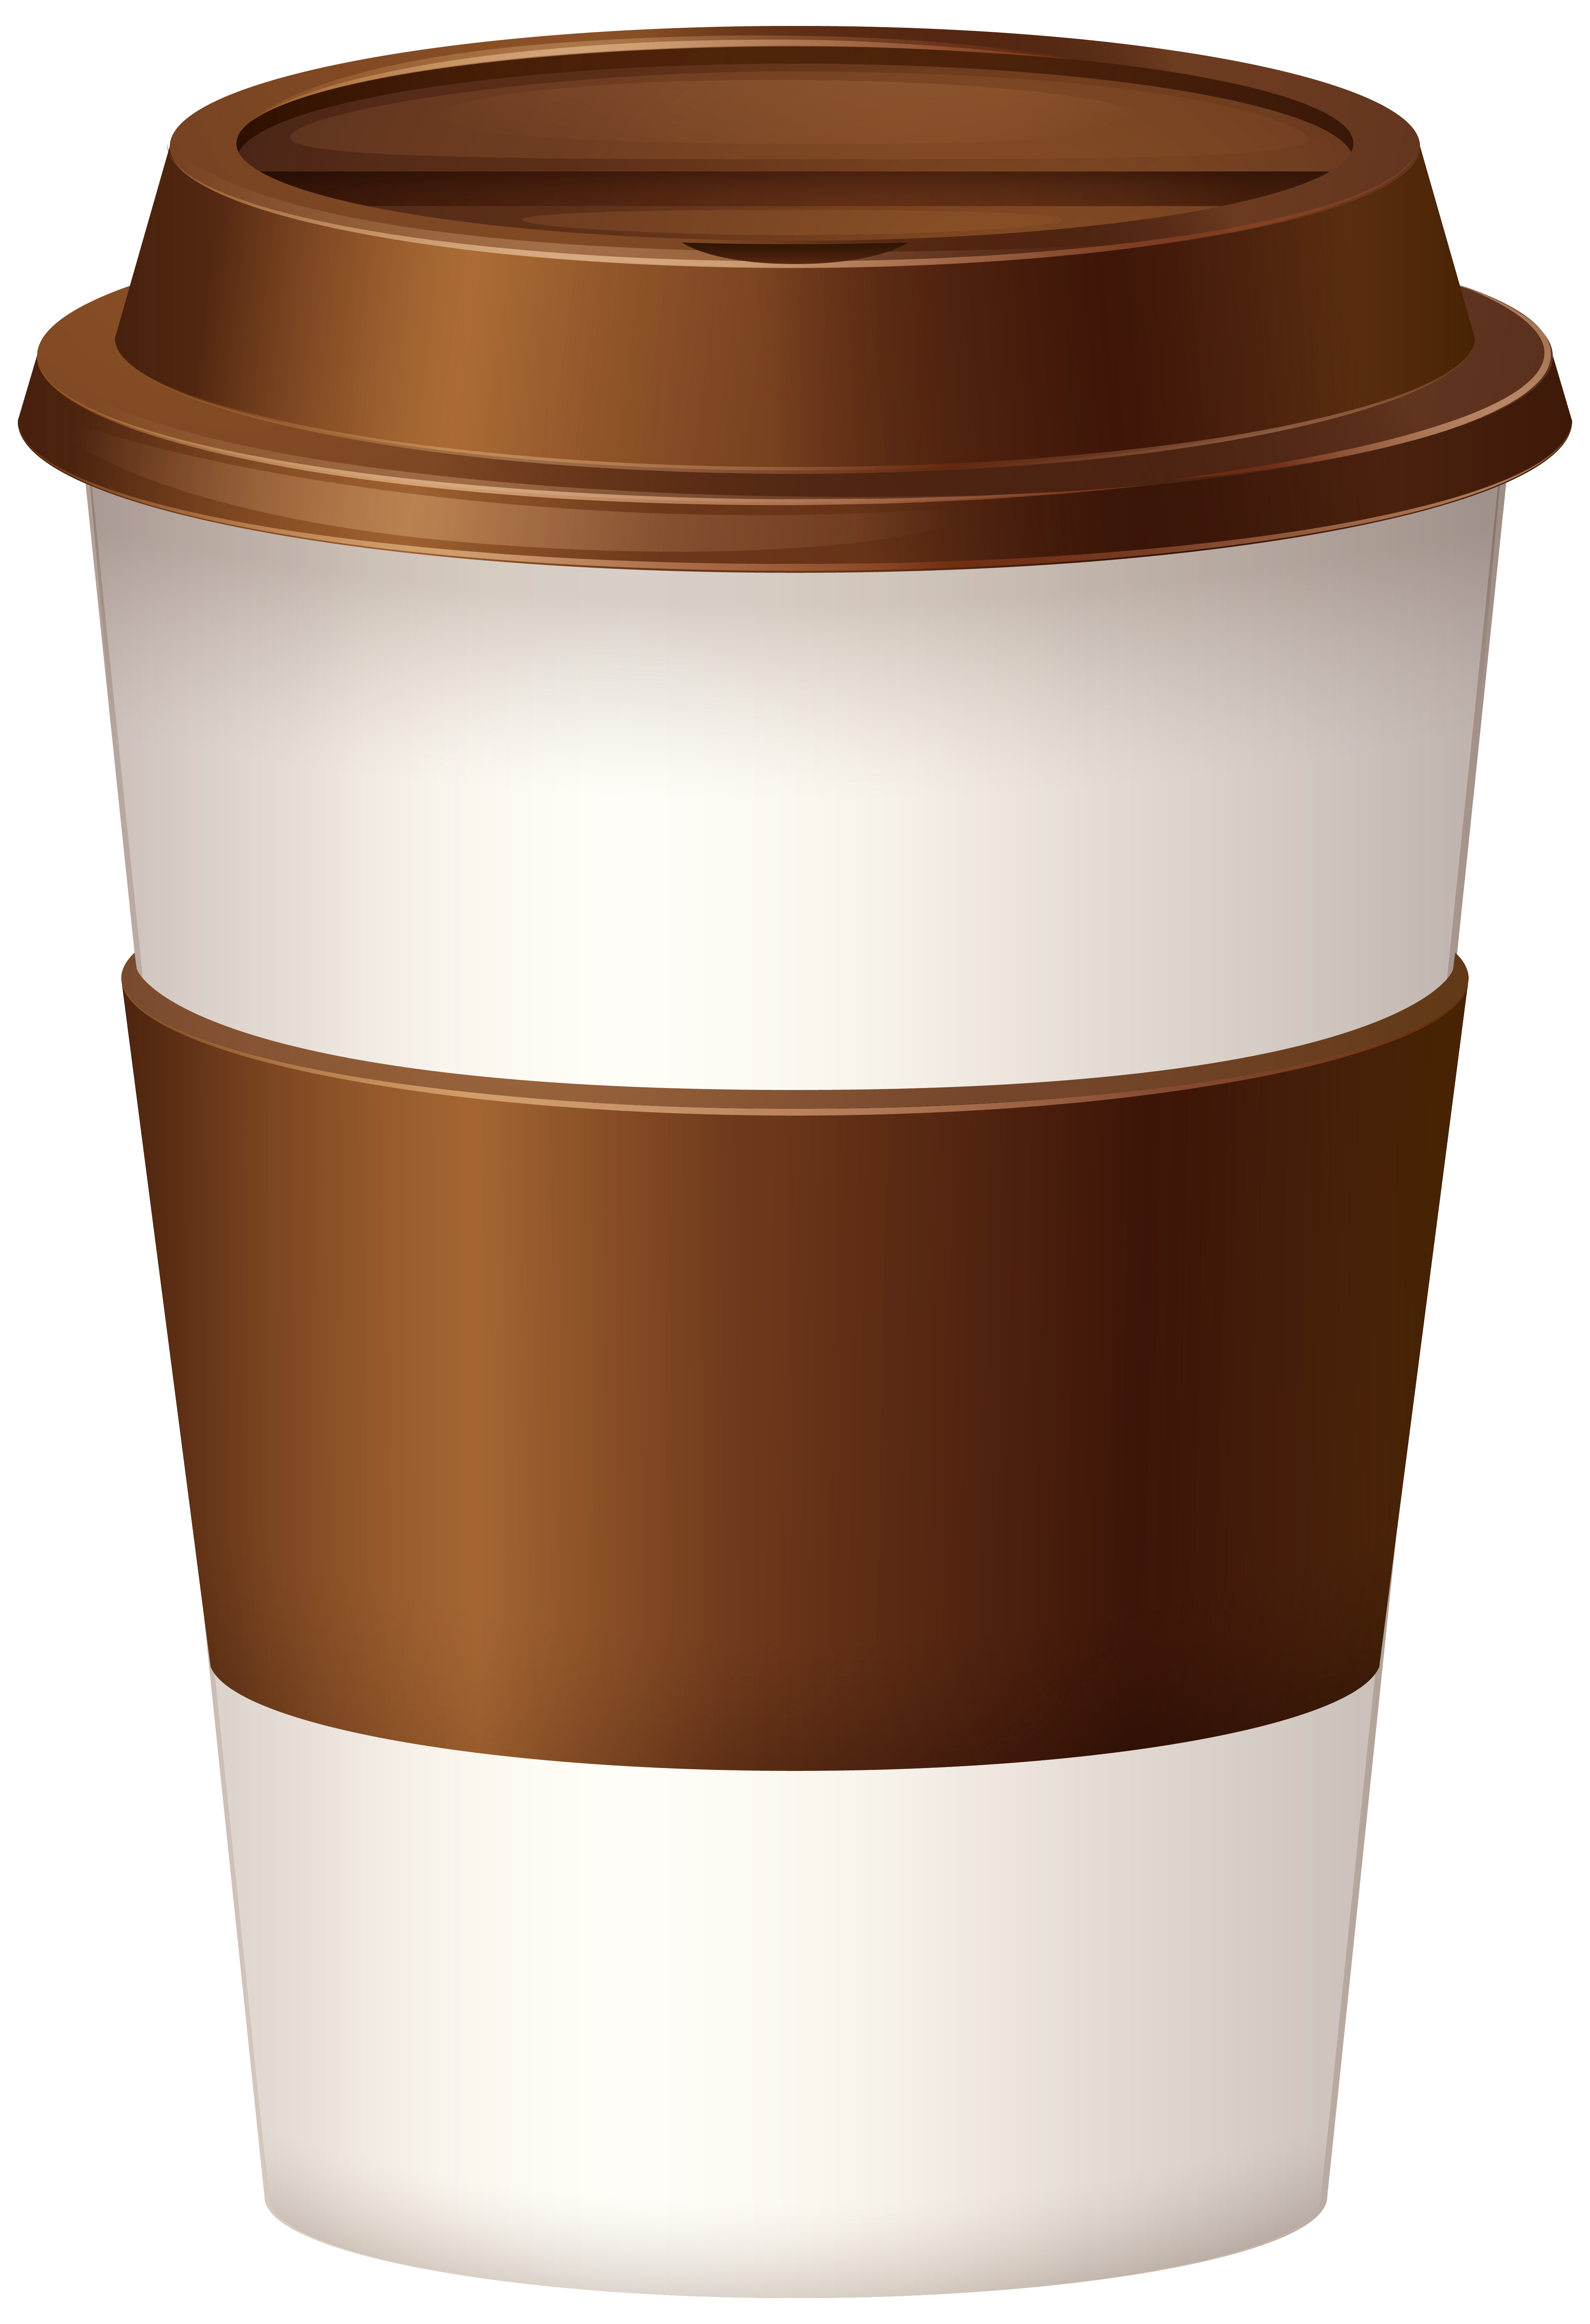 Hot Coffee Cup Image Png Image Clipart